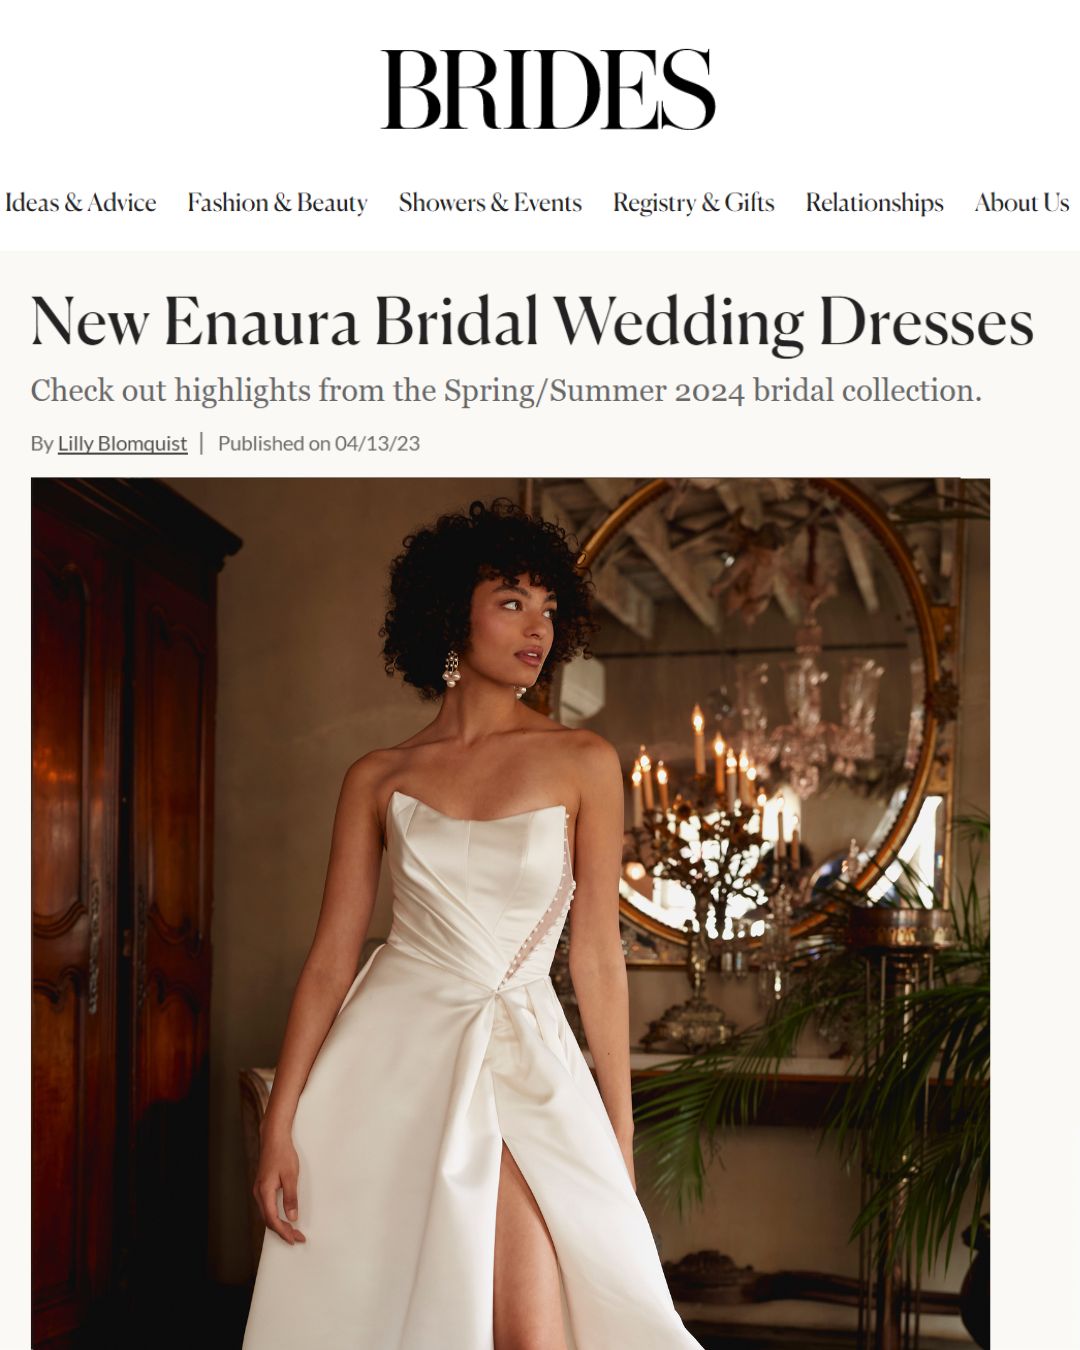 BRIDES feature: New Enaura Spring/Summer 2024 bridal collection